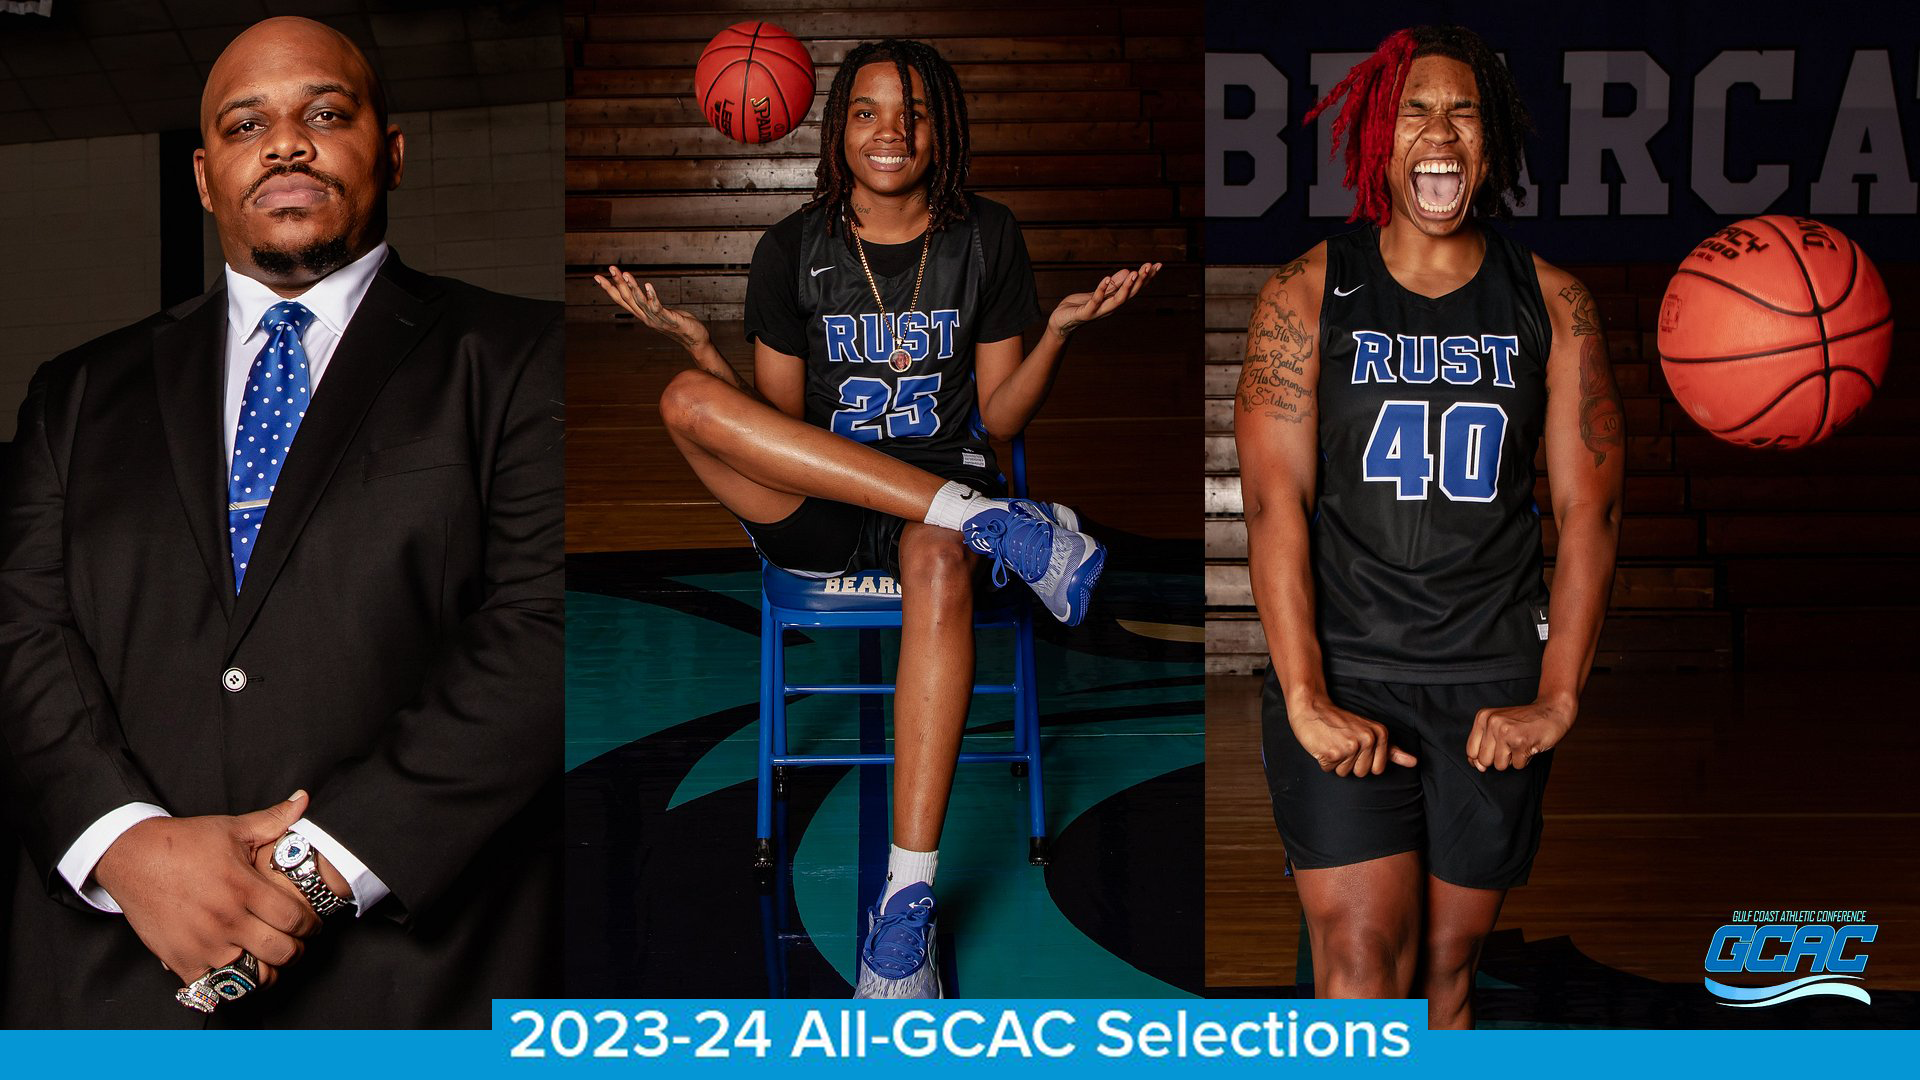 Sweats, McGuire & Coach Jackson Jr. Honored With GCAC Accolades